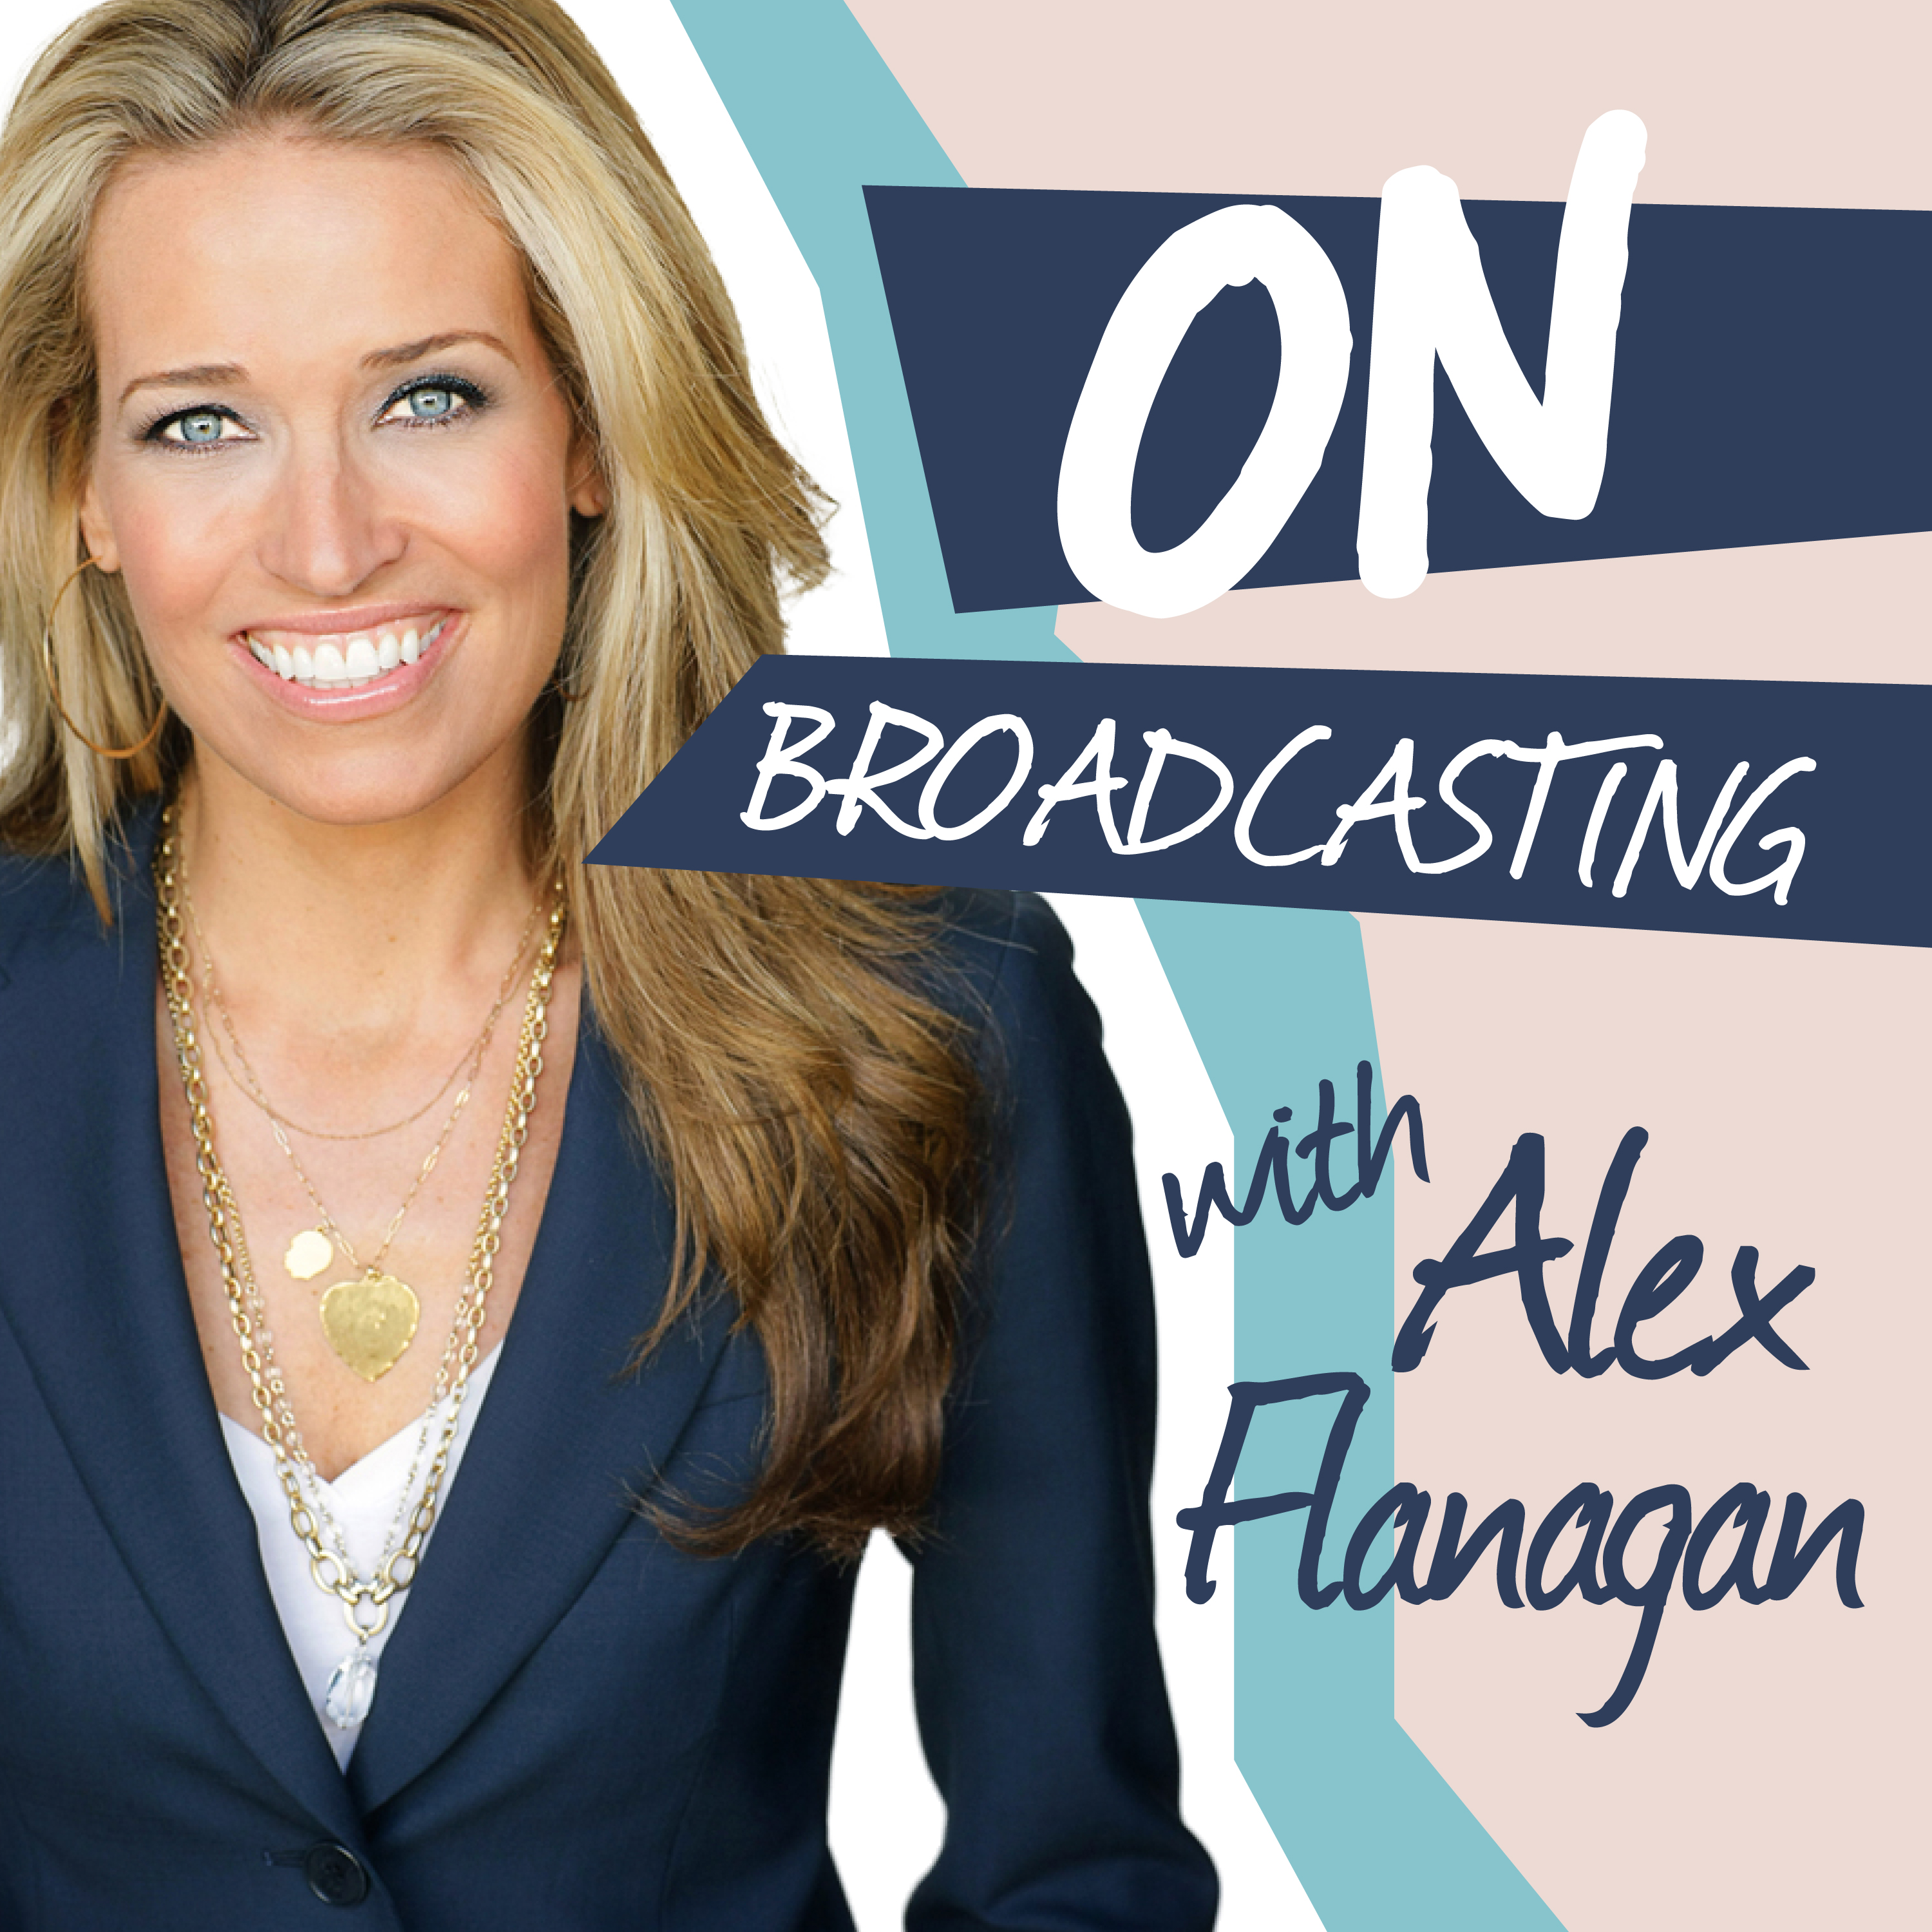 On Broadcasting with Alex Flanagan